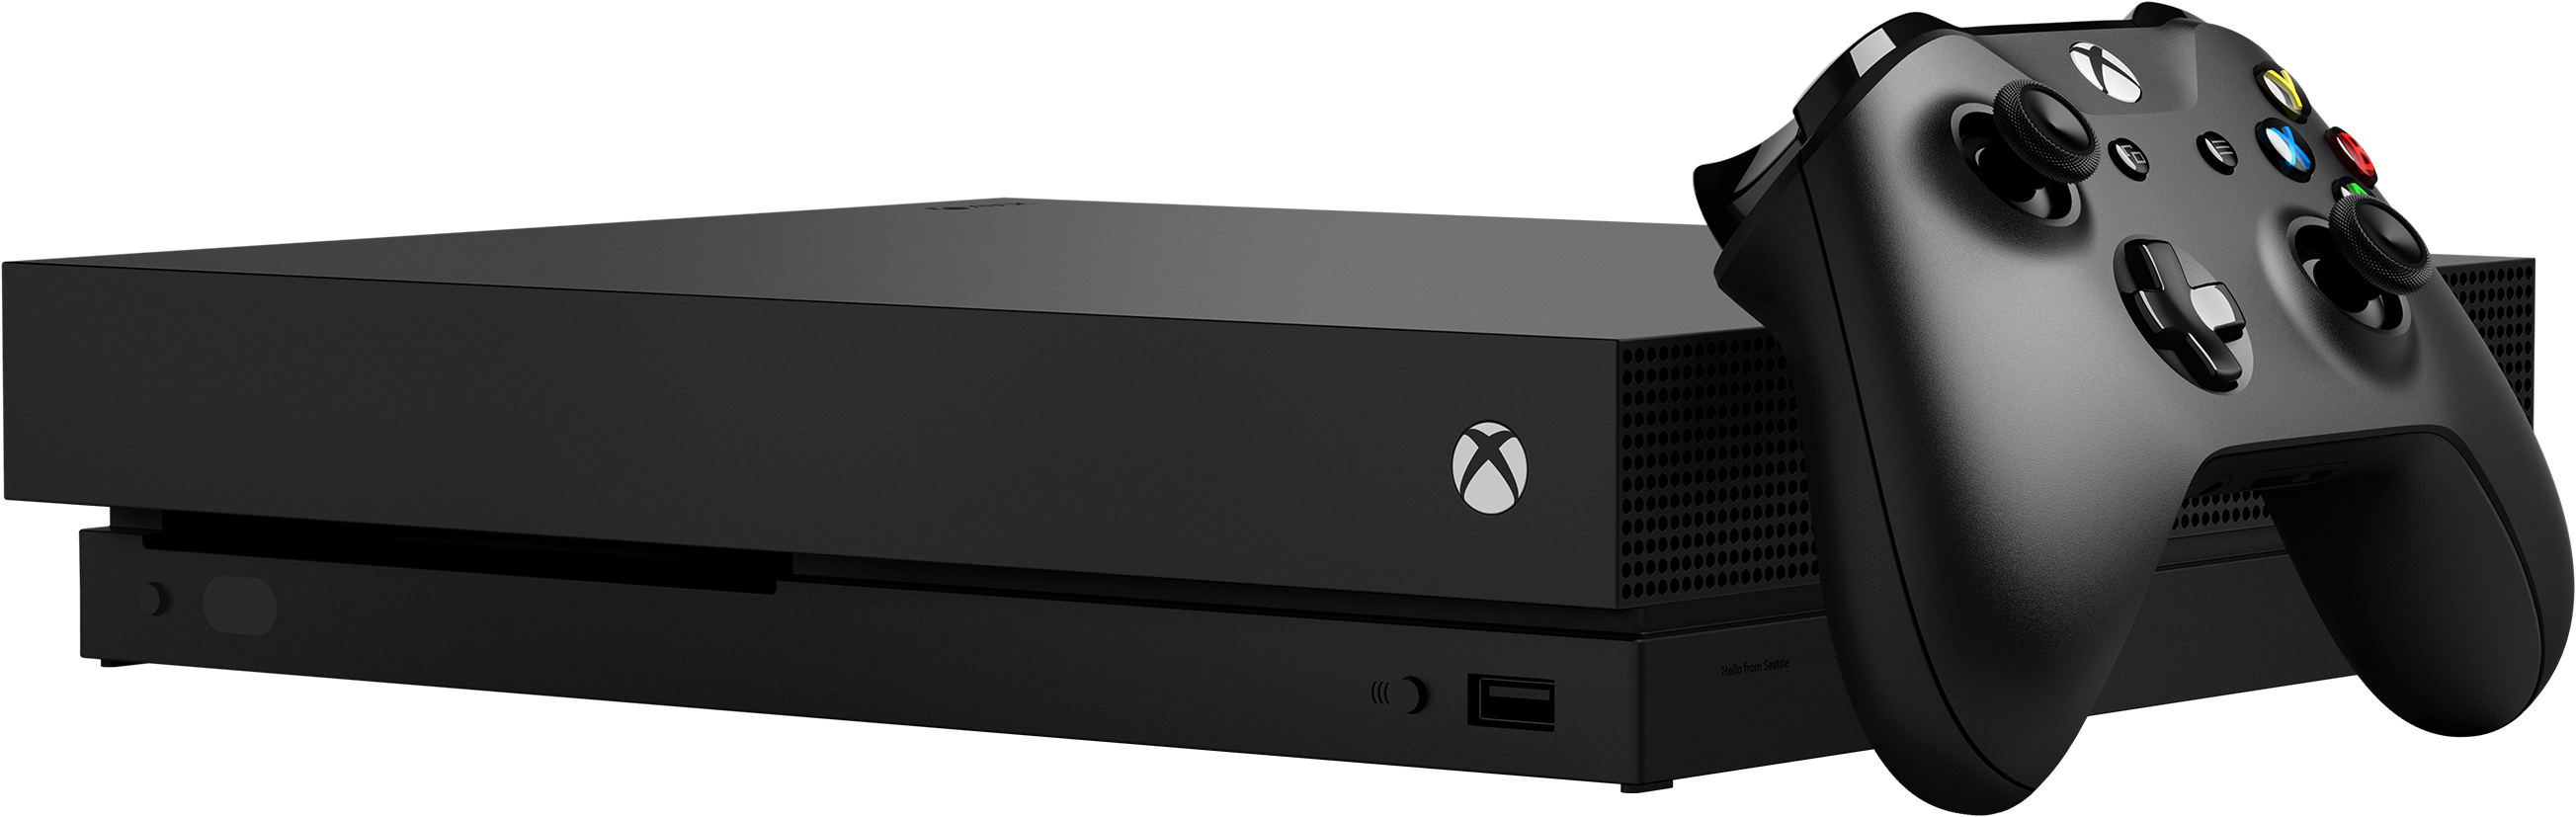 xbox one x in store